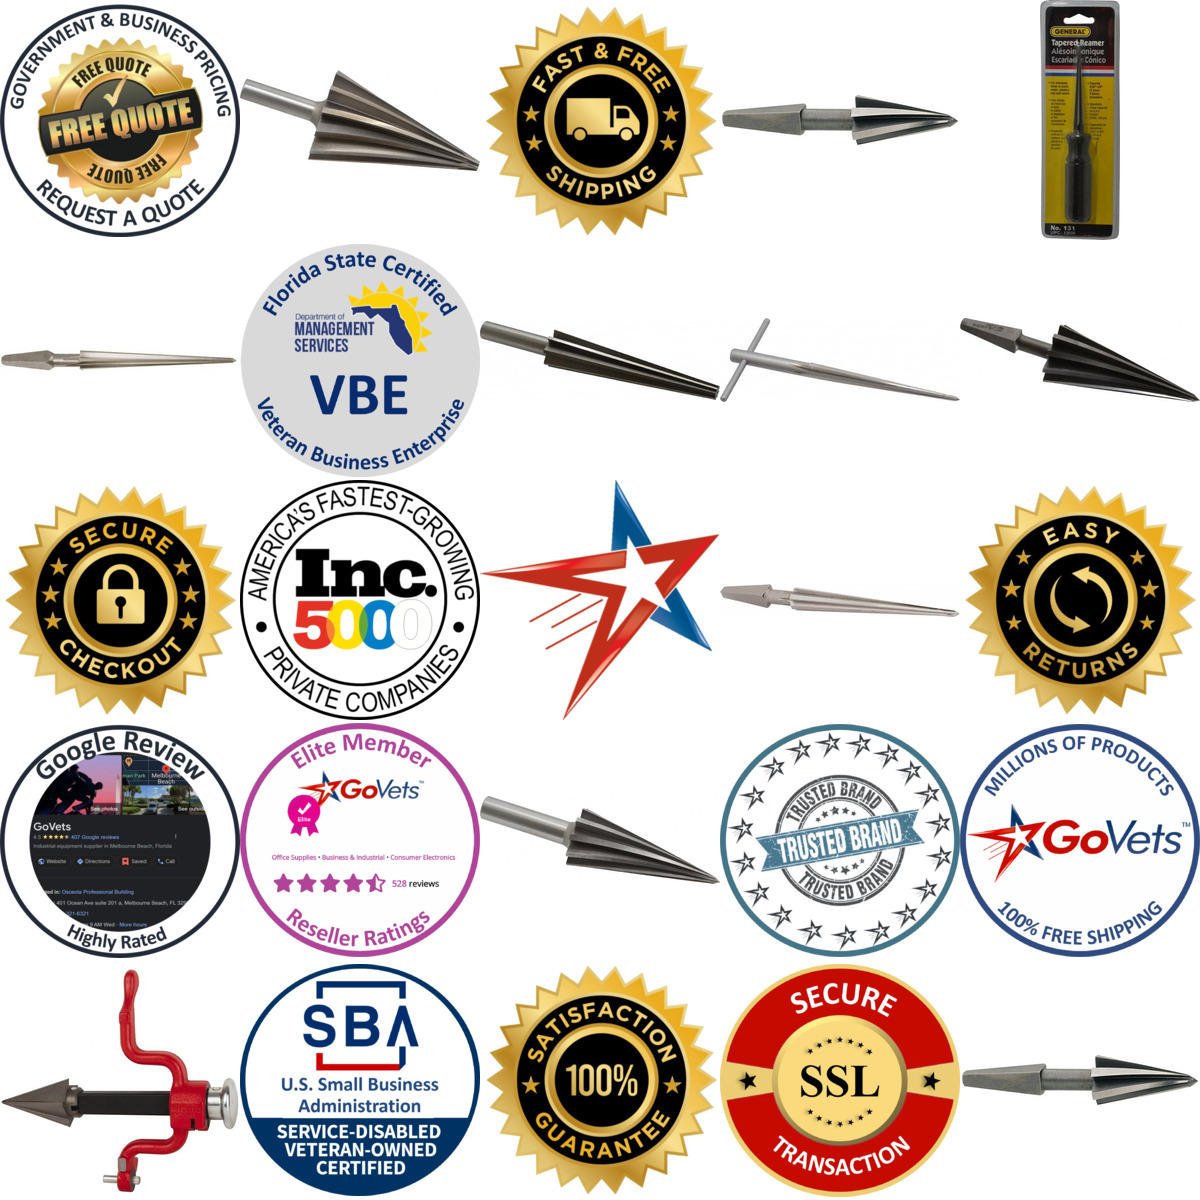 A selection of Repairmans Reamers products on GoVets